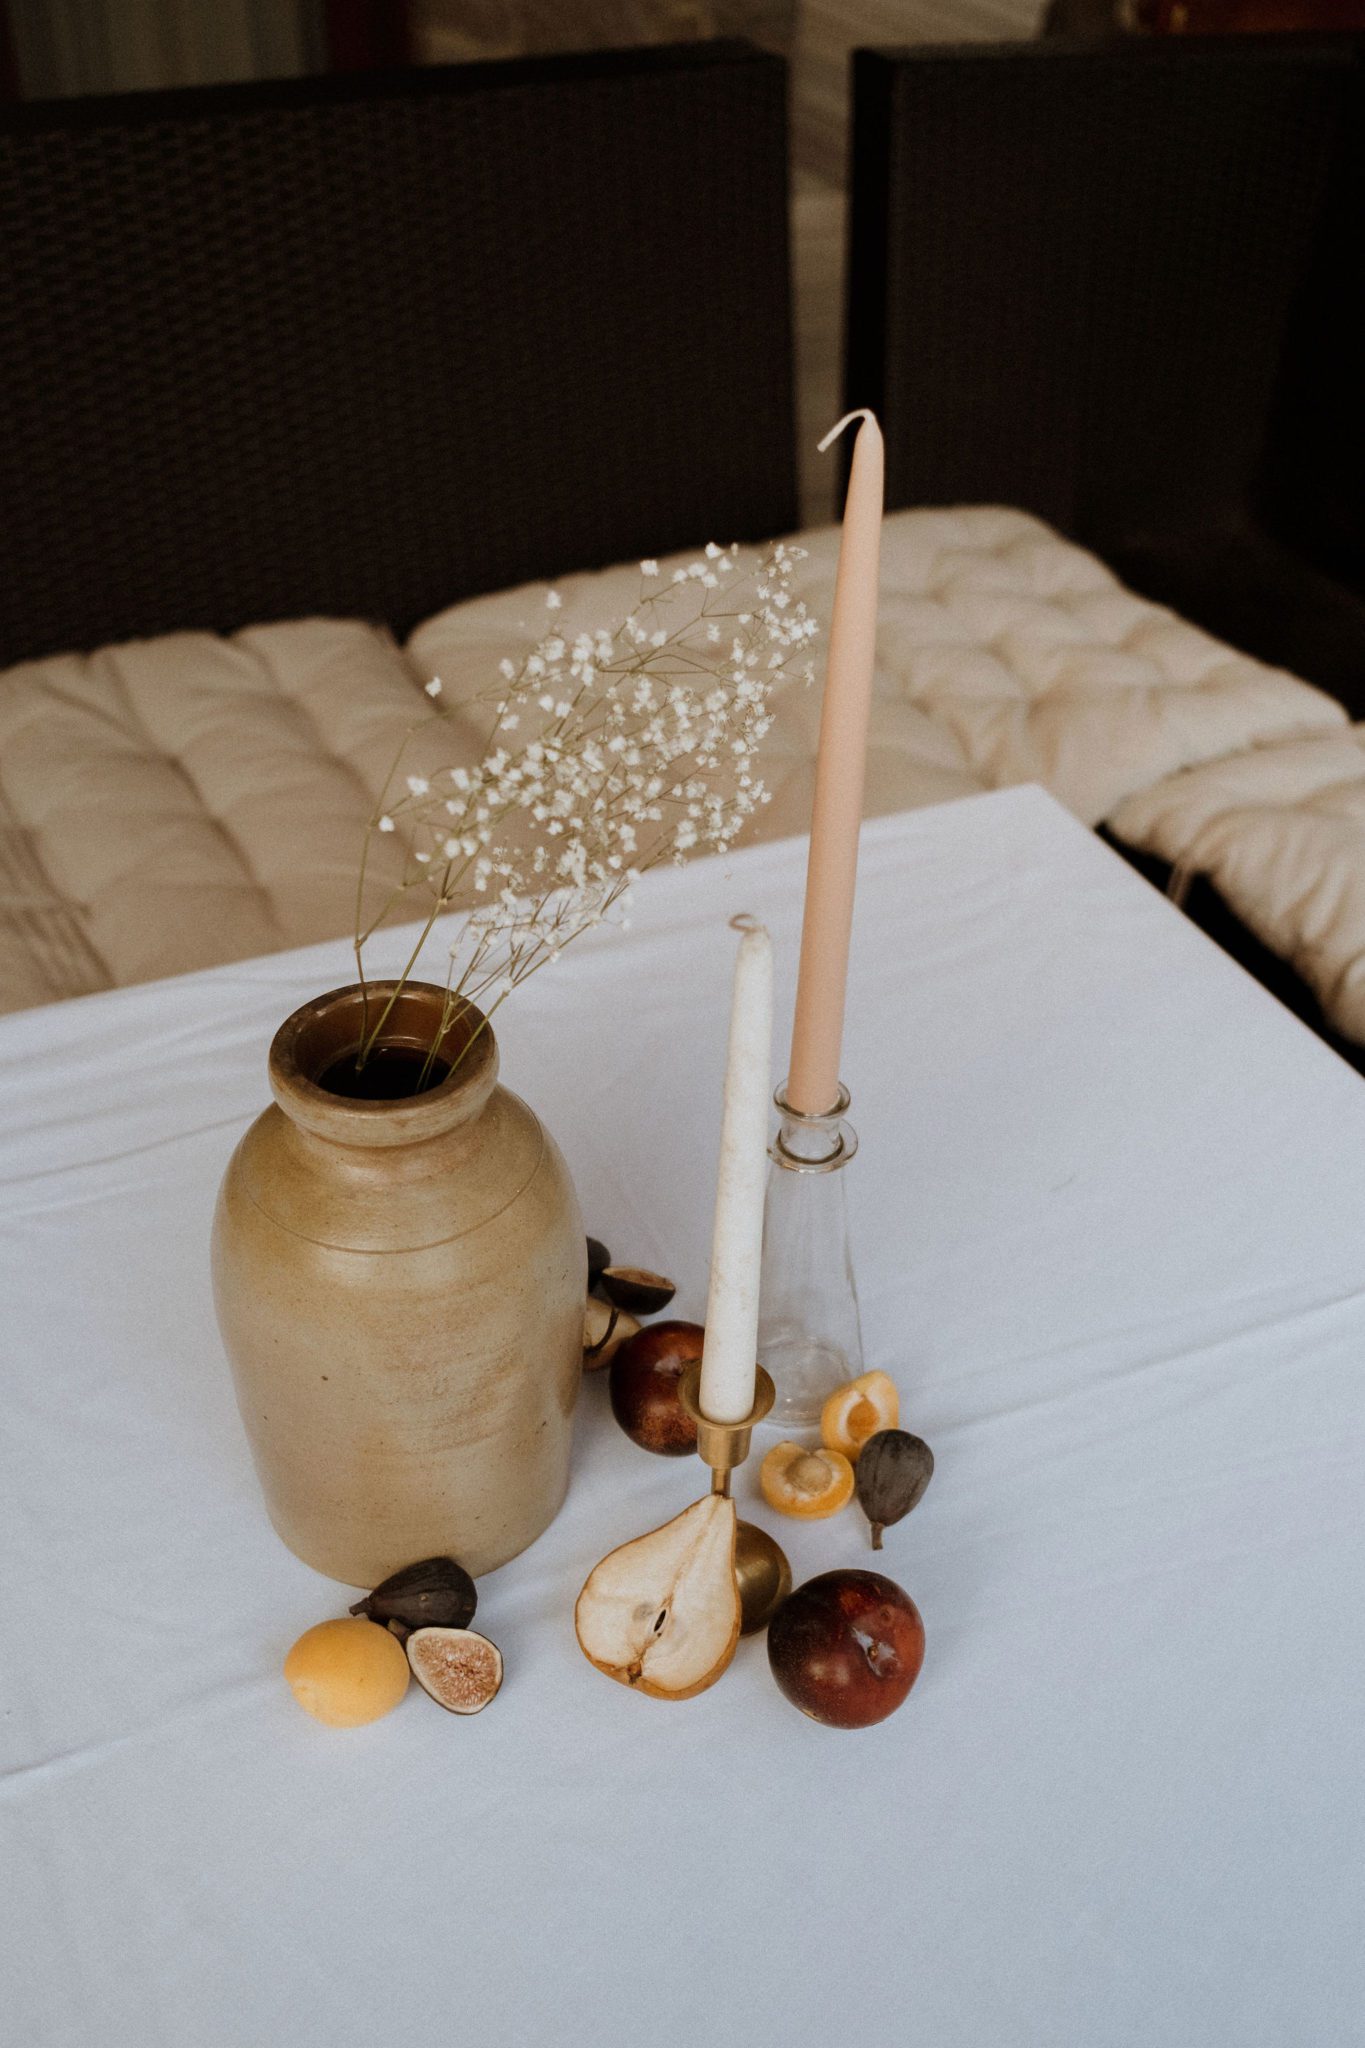 Cottage core wedding inspiration with pear and fig accents, unique wedding decor inspiration